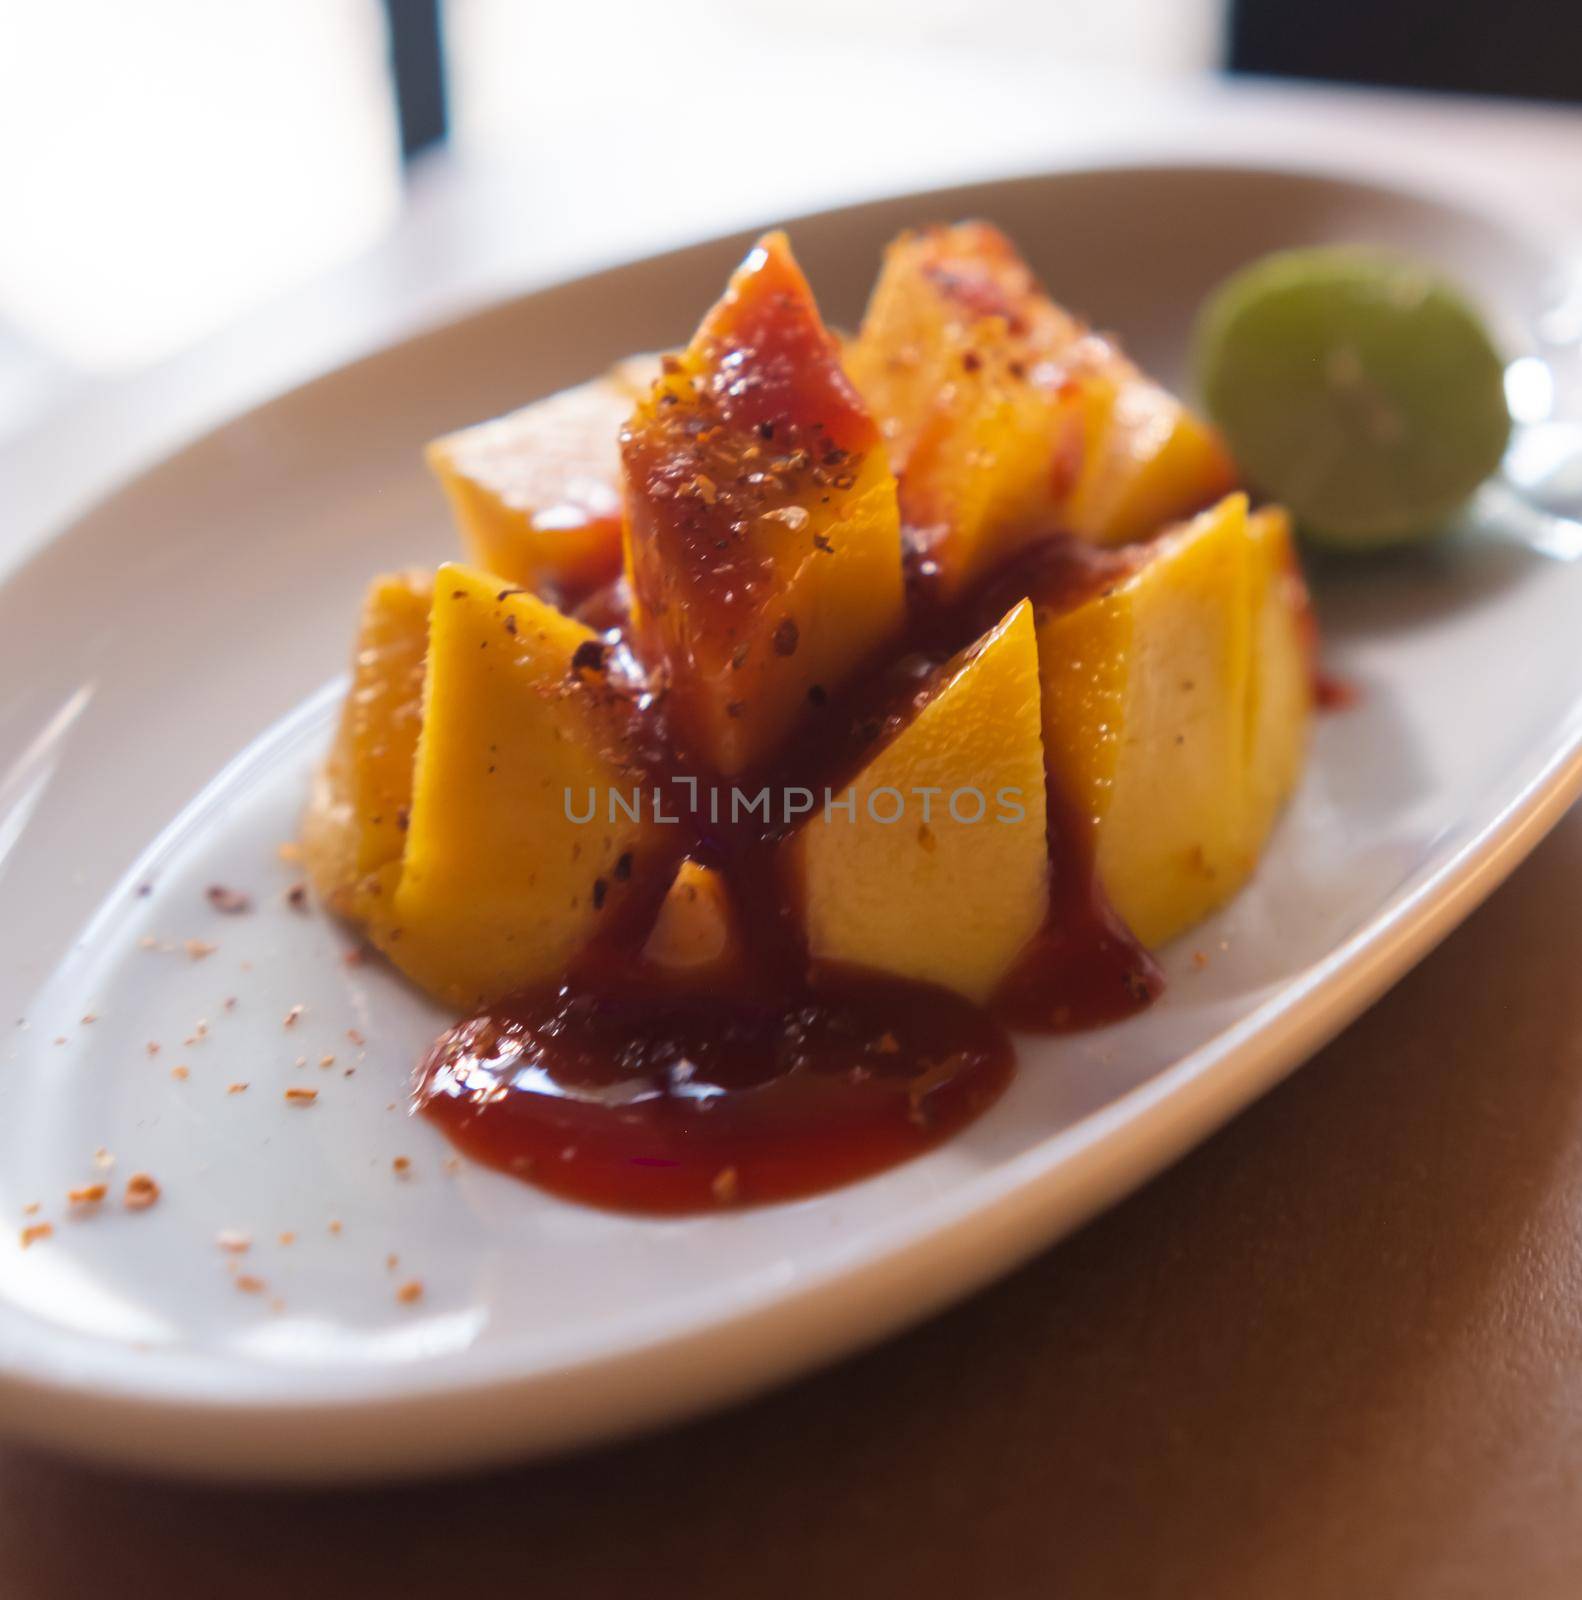 Plate of chopped mango with Mexican chamoy sauce and blurry background by Kanelbulle